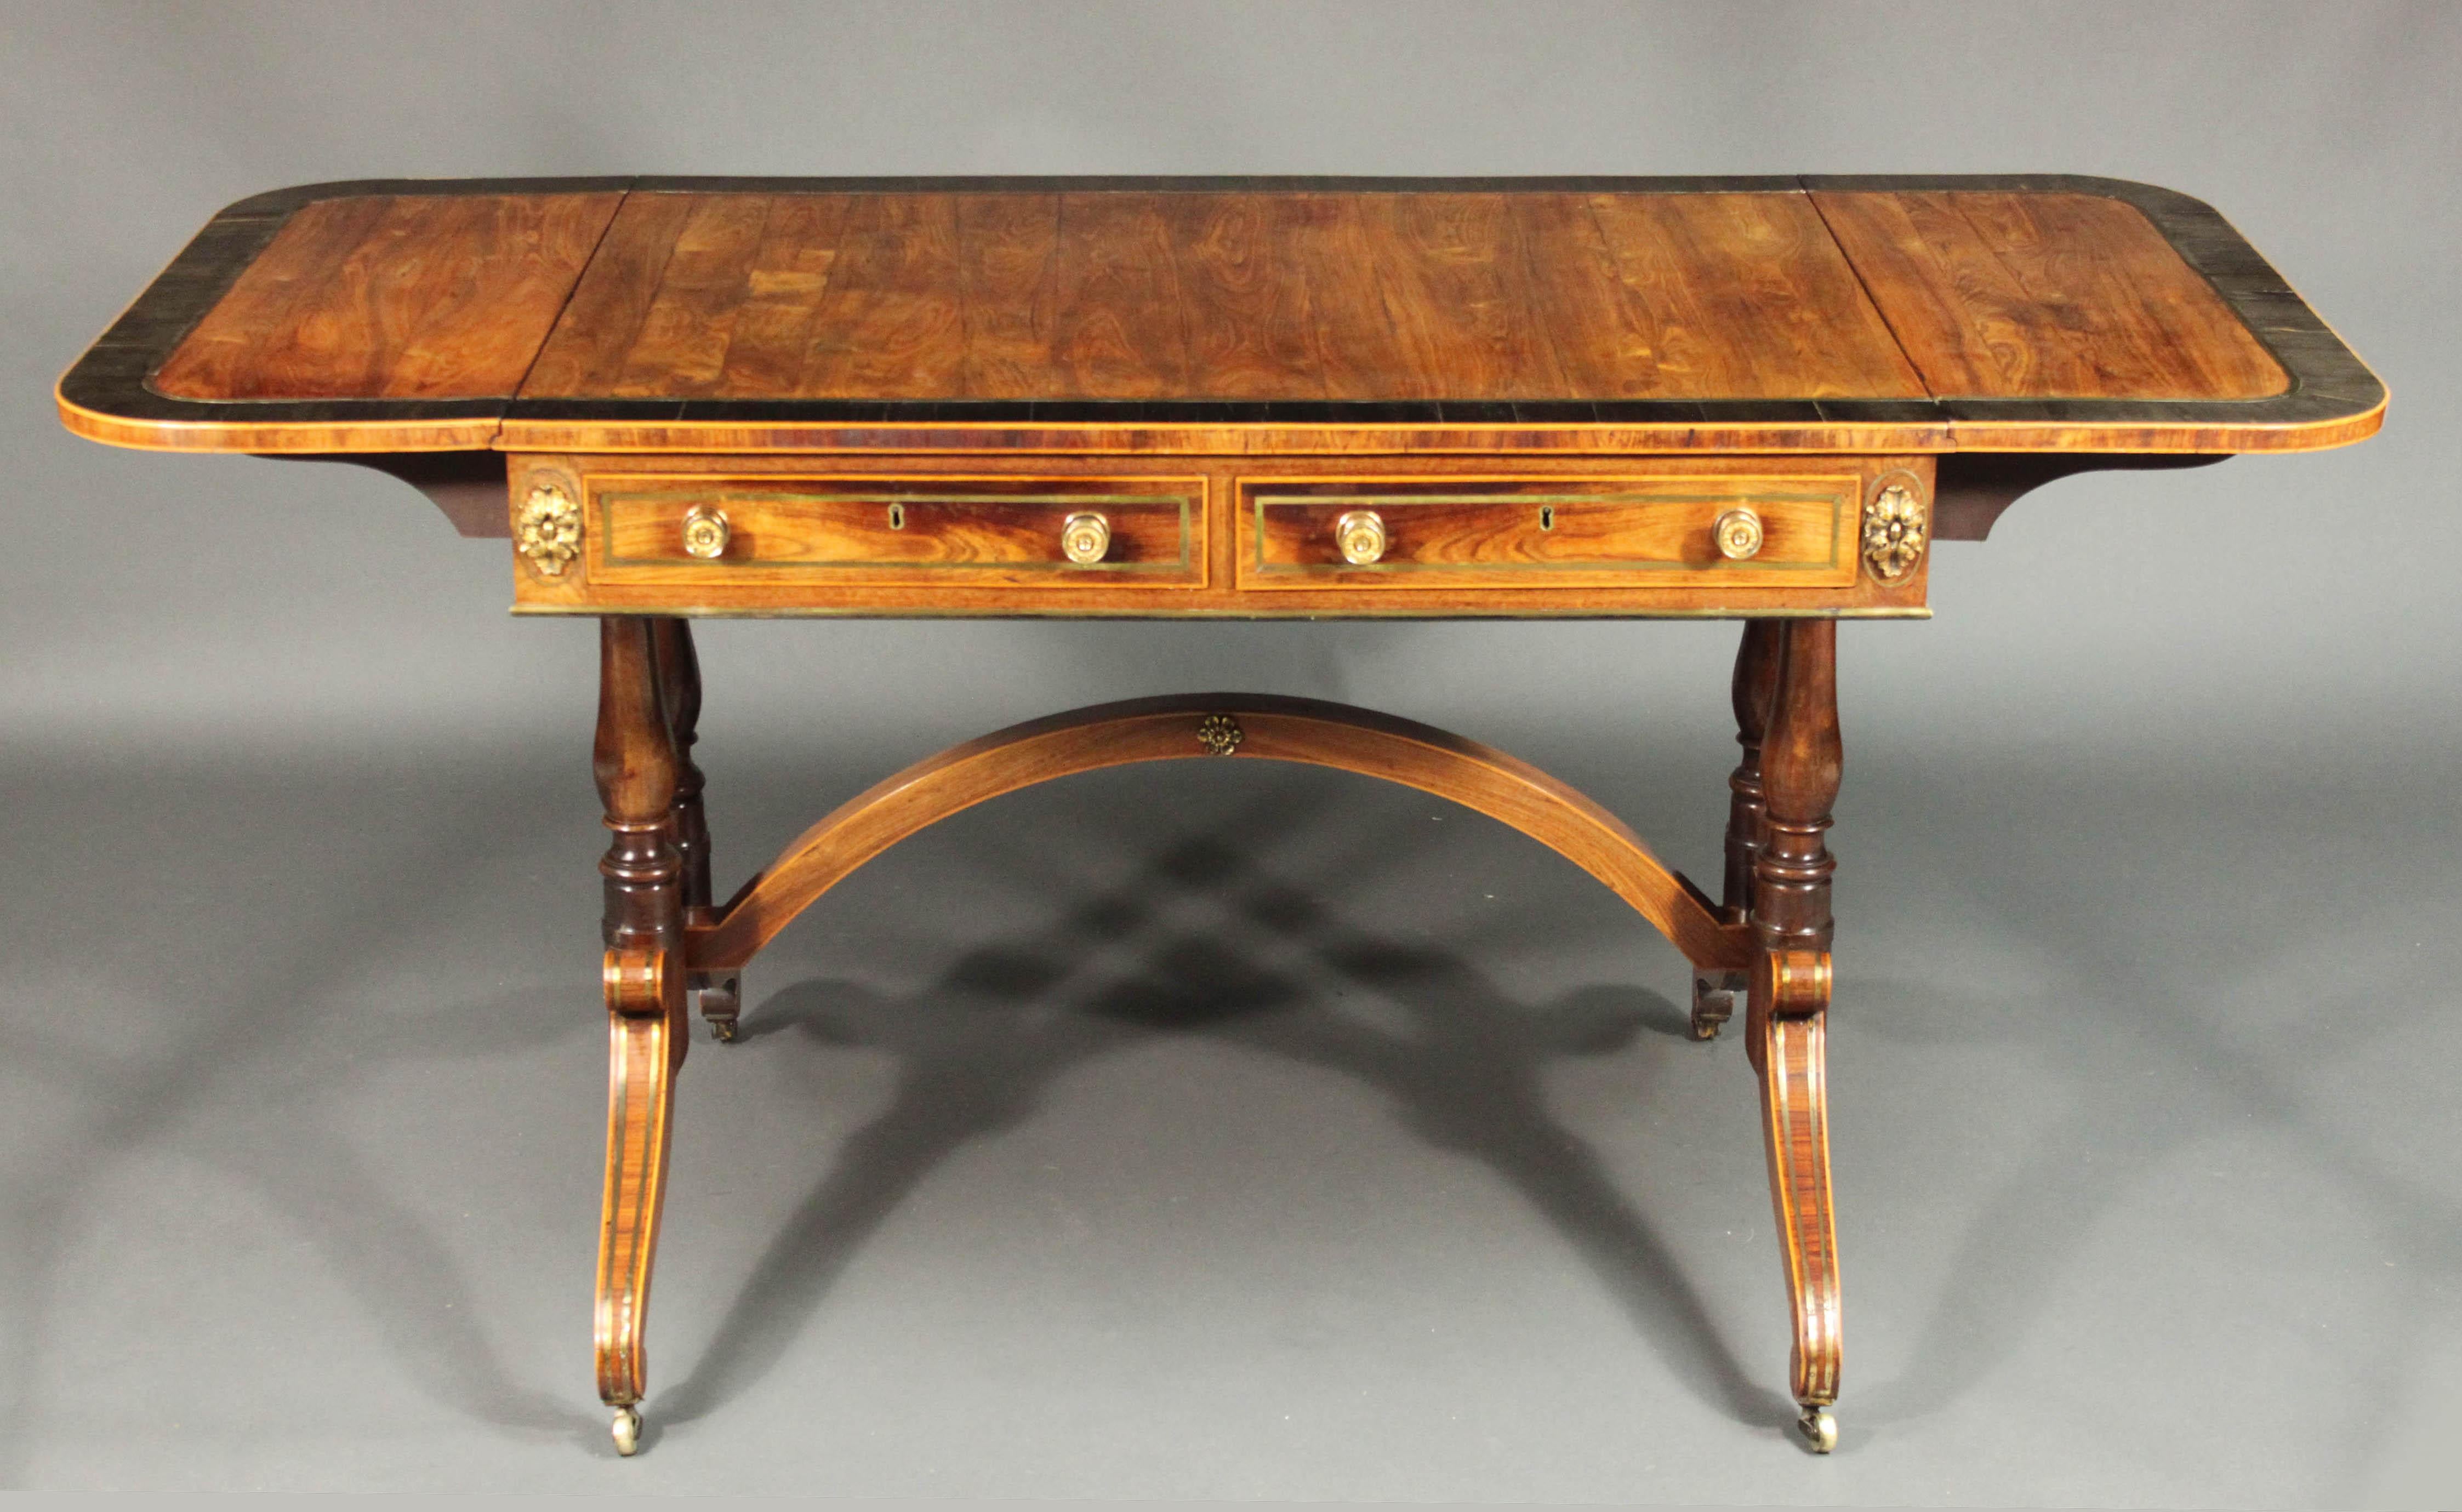 Regency standard-end brass inlaid sofa table in kingwood with Fine ormolu mounts and ebony and boxwood inlay; 2 oak-lined drawers with boxwood cockbeading.

Kingwood is often used in small pieces for crossbanding and inlay but it is rare to find a